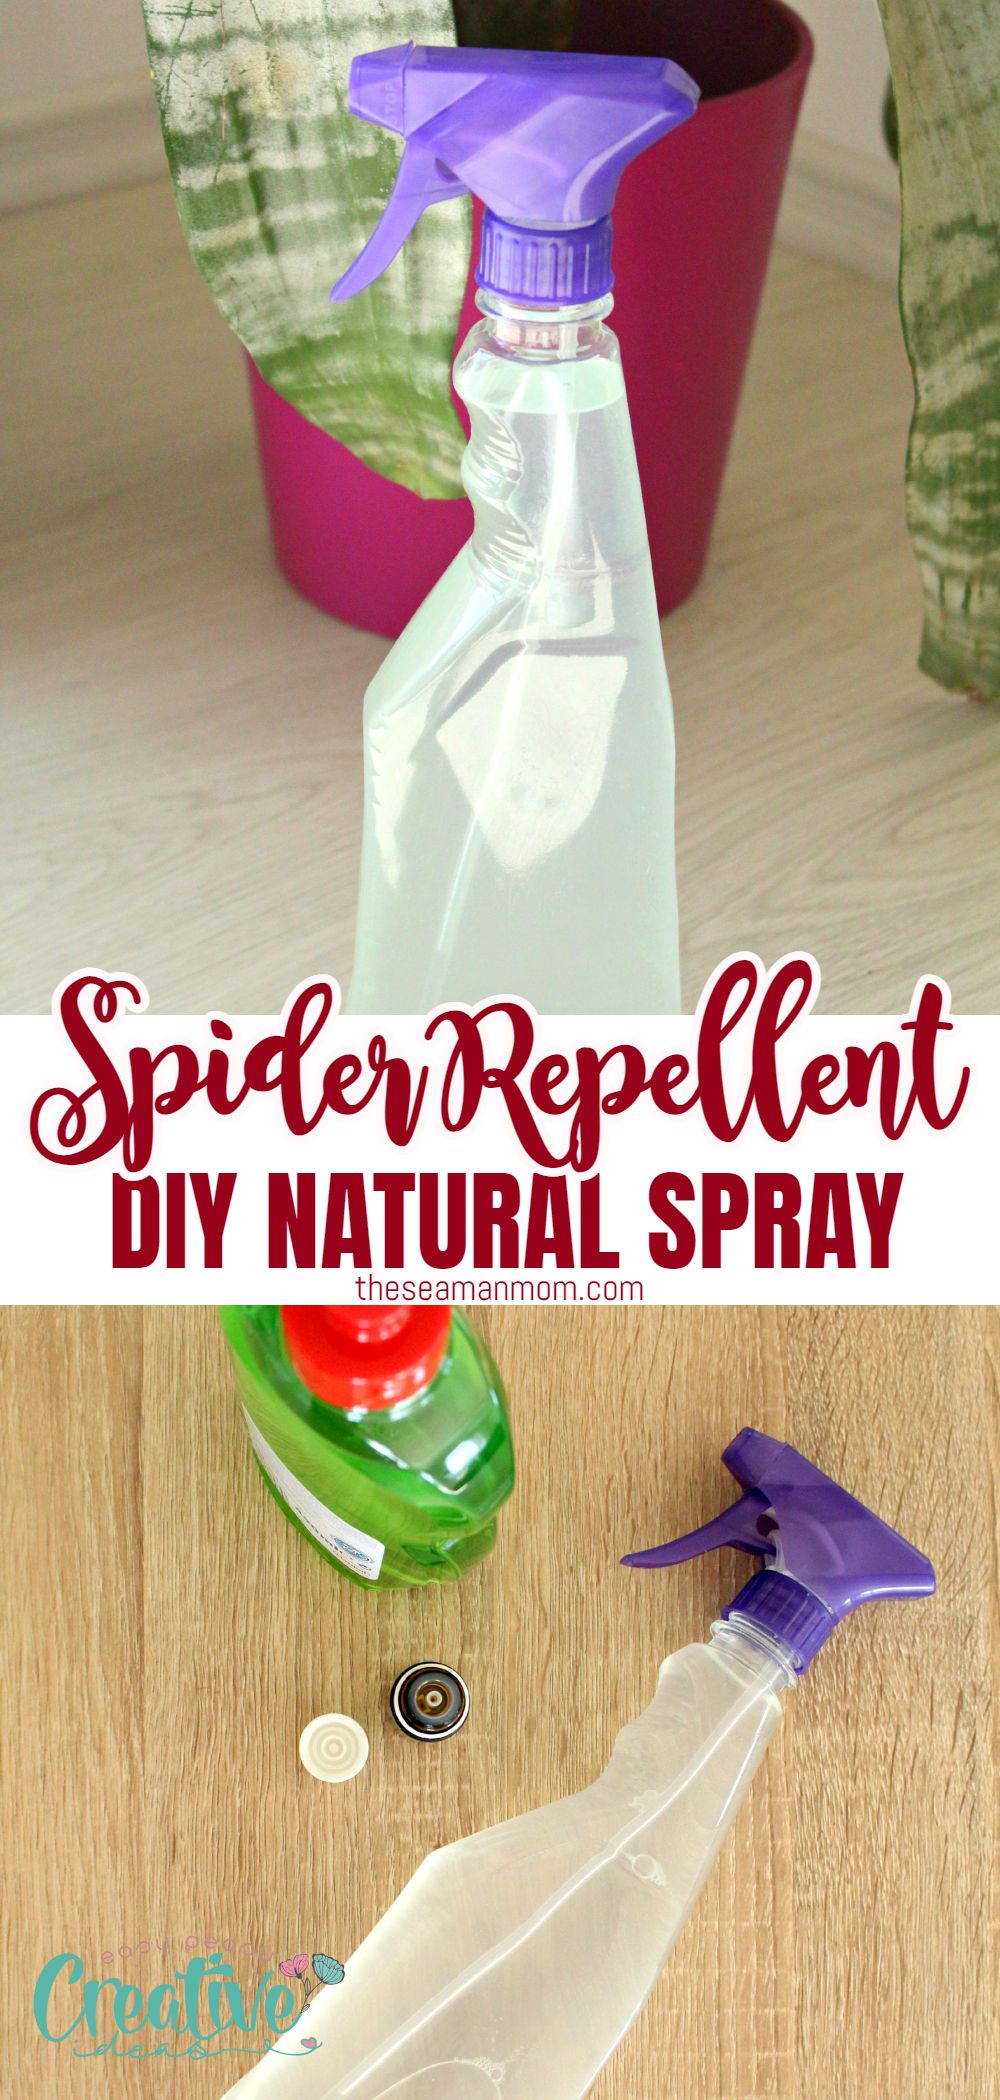 If you're looking for a natural and effective way to get rid of spiders, this DIY spider repellent spray is definitely worth a try! All you need are some simple ingredients that you probably already have at home, and you can say goodbye to those pesky spiders for good. So what are you waiting for? Give it a go today and let me know how it works for you! via @petroneagu